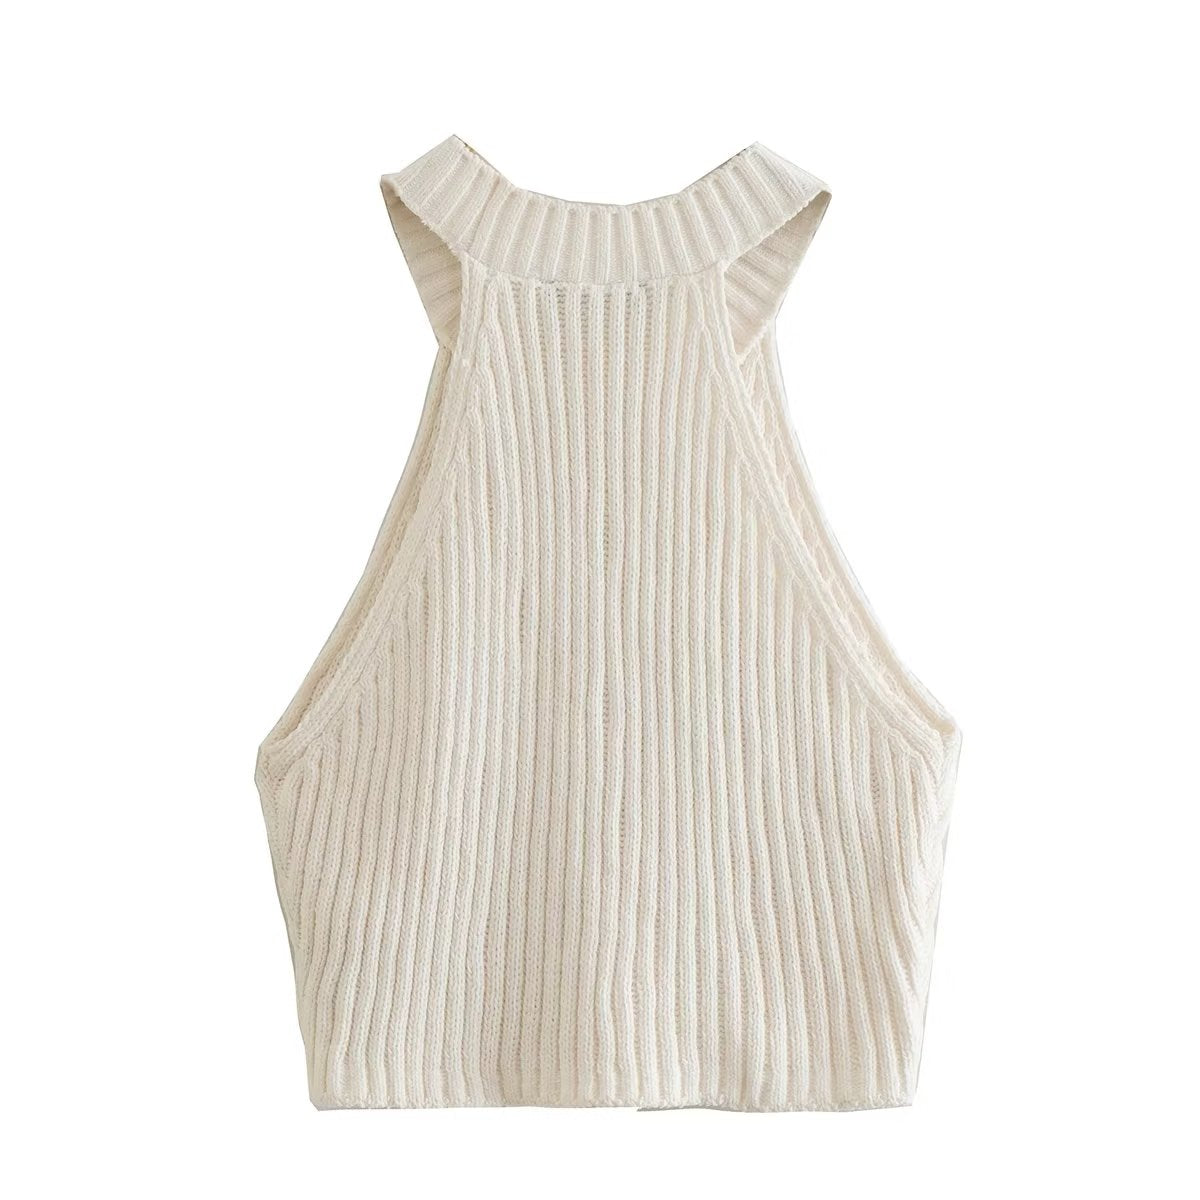 Crystal Inlaid Knitted Small Tank Top( Clearance Sale)